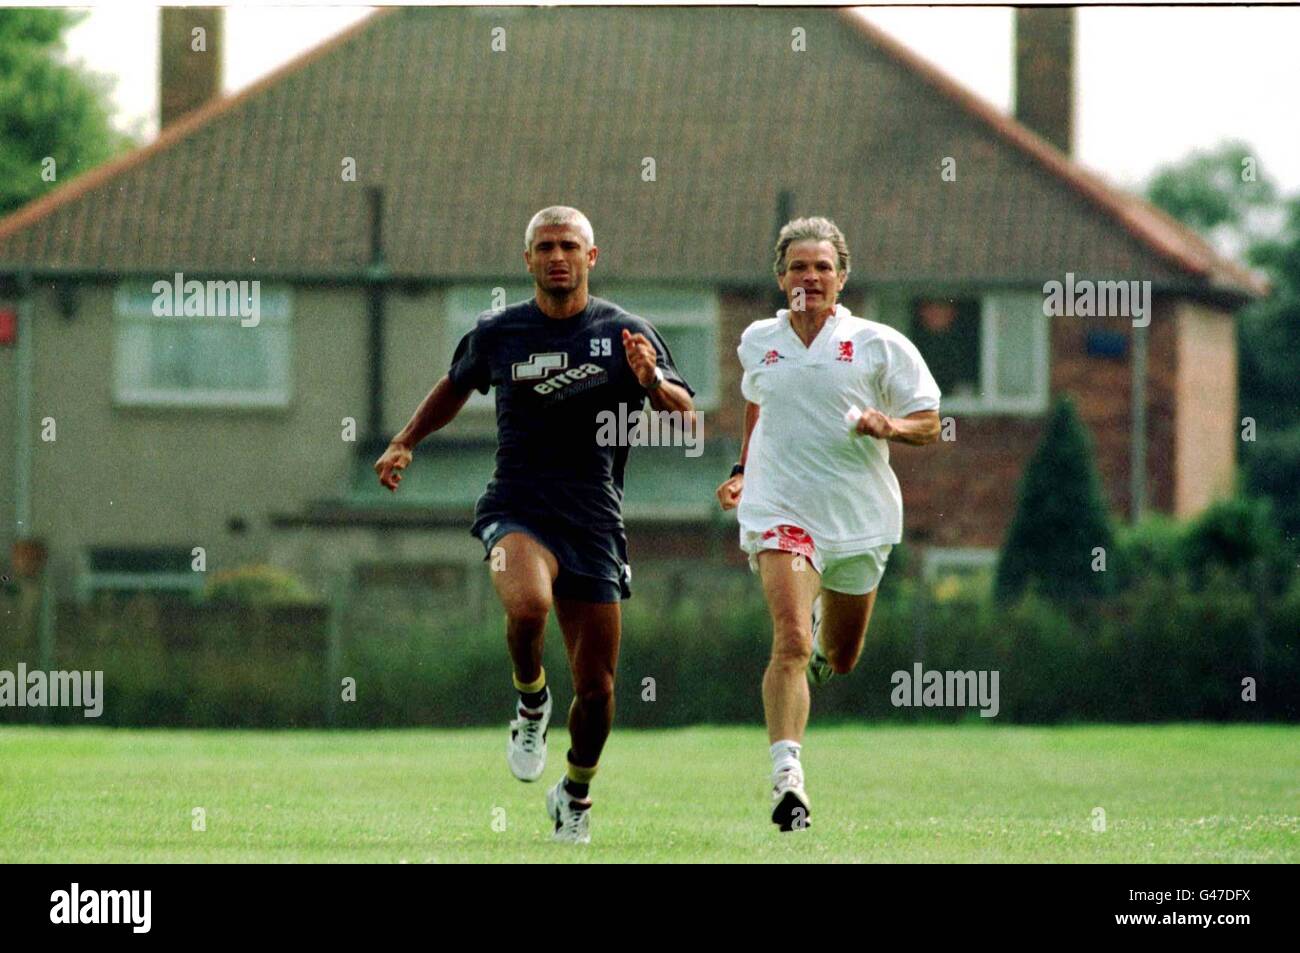 Middlesbrough's Fabrizio Ravanelli (left) during his pre-season training session with fitness trainer John Emmett, today (Weds), after renewing his terms yesterday with manager Bryan Robson. Photo Owen Humphreys/PA. Stock Photo